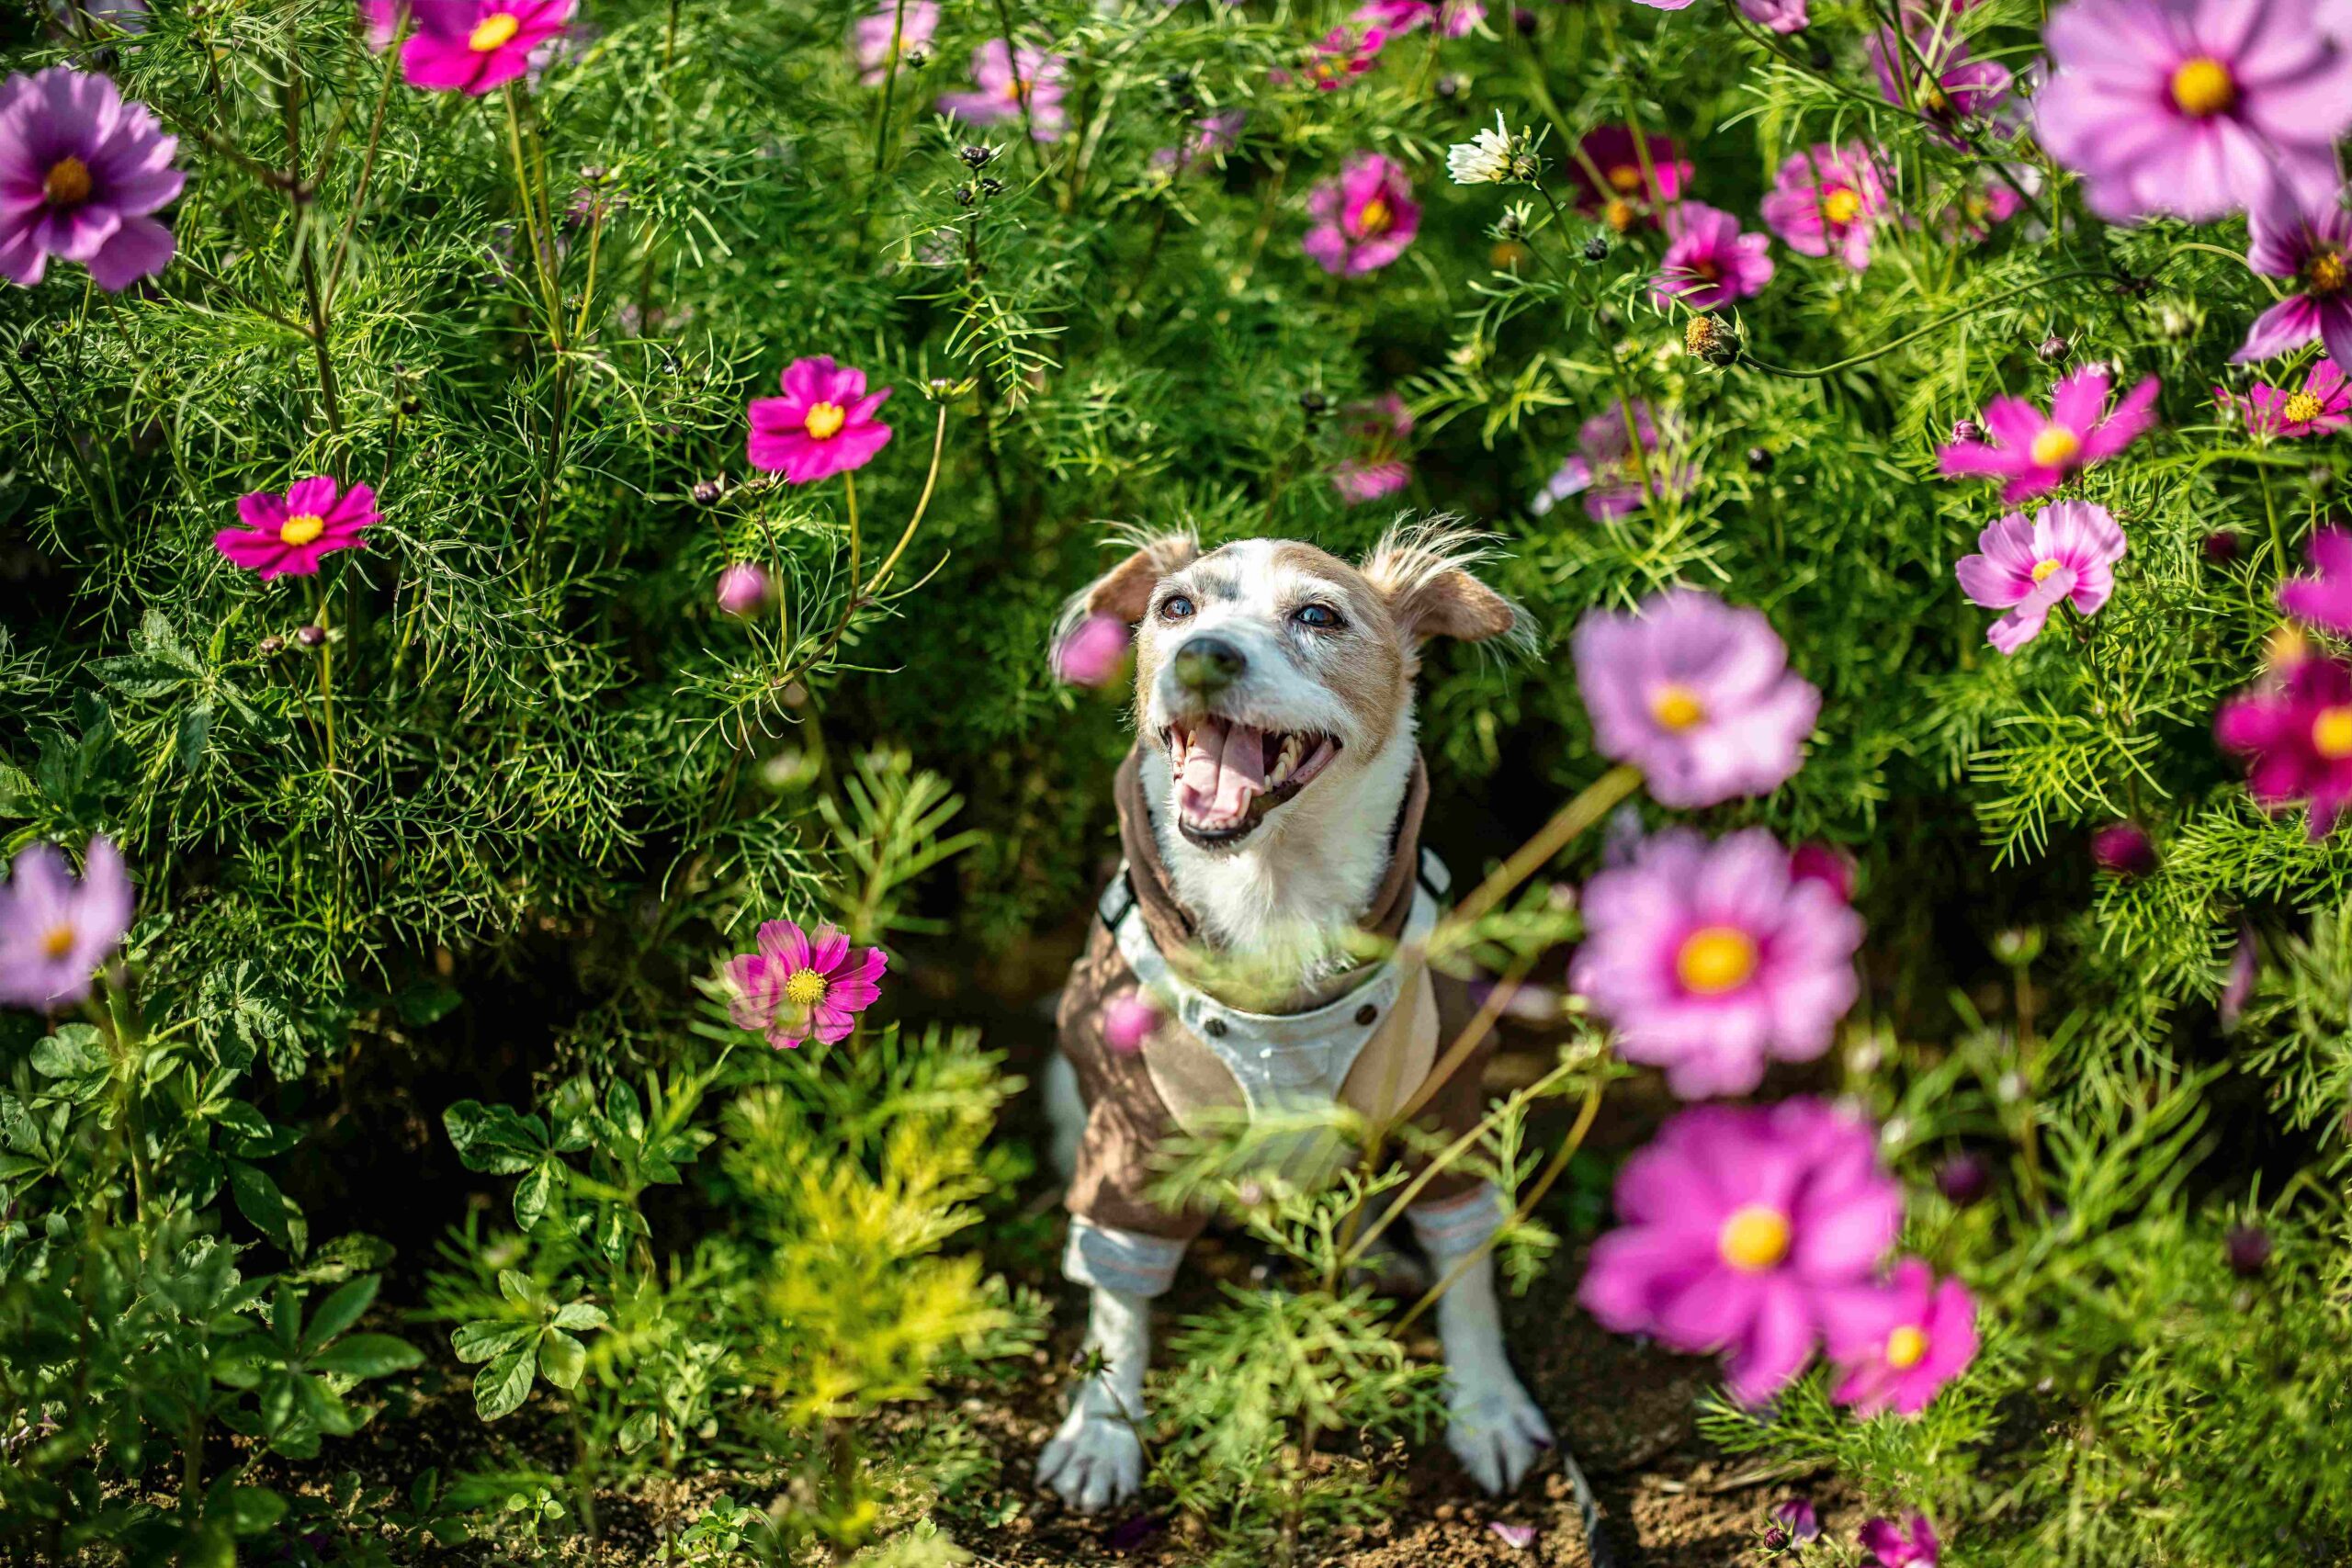 Dog outside, surrounded by flowers